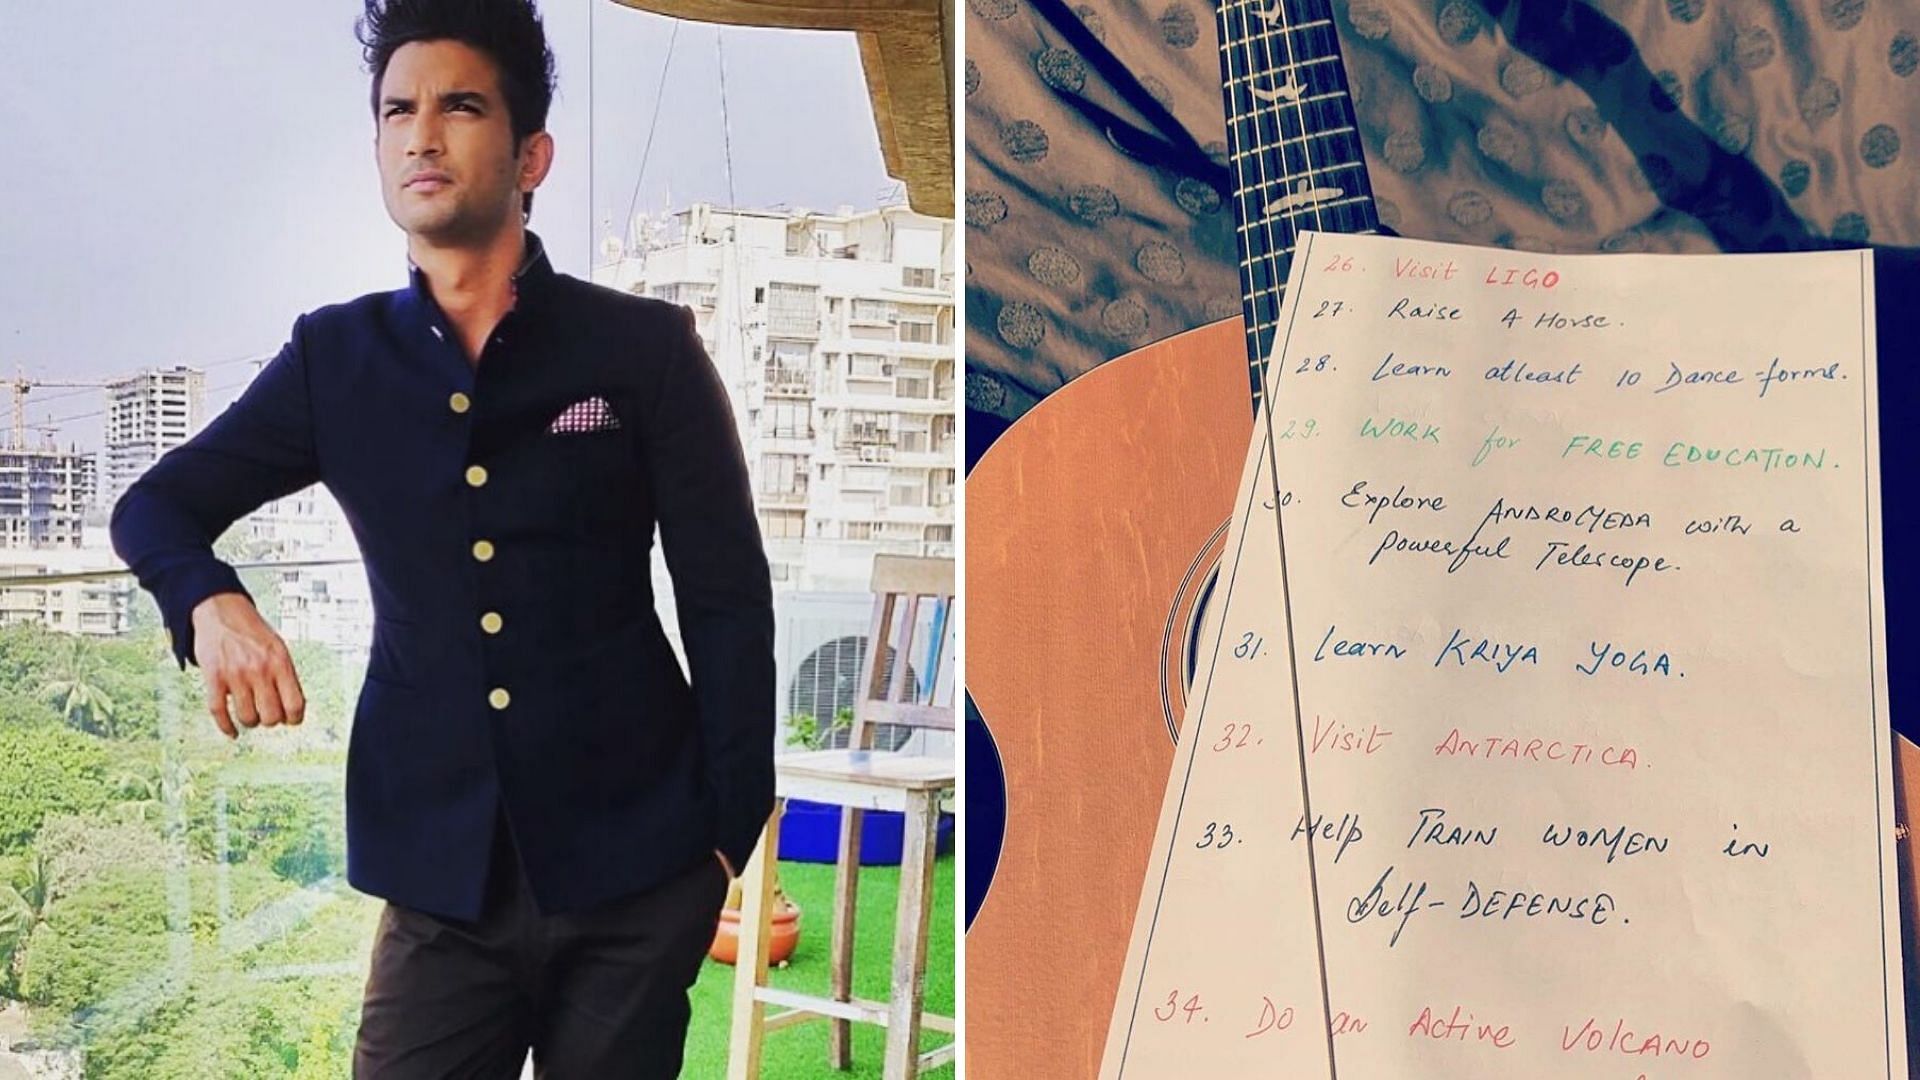 Sushant Singh Rajput’s ‘50 dreams’ are being widely shared on Twitter.&nbsp;